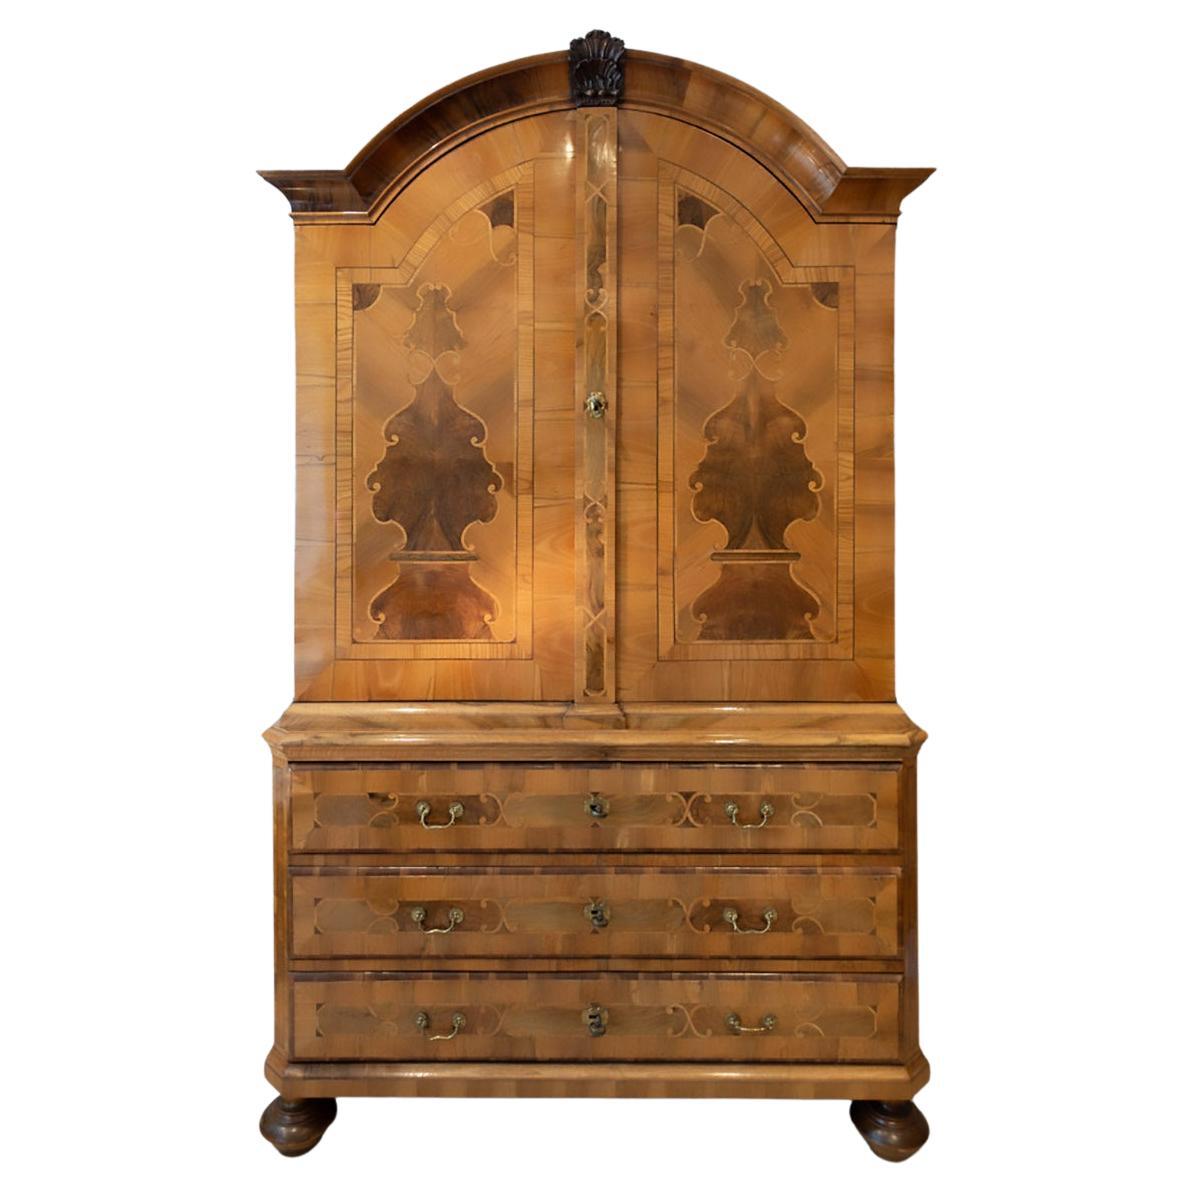 Top Cabinet in Walnut and Other Woods, Germany